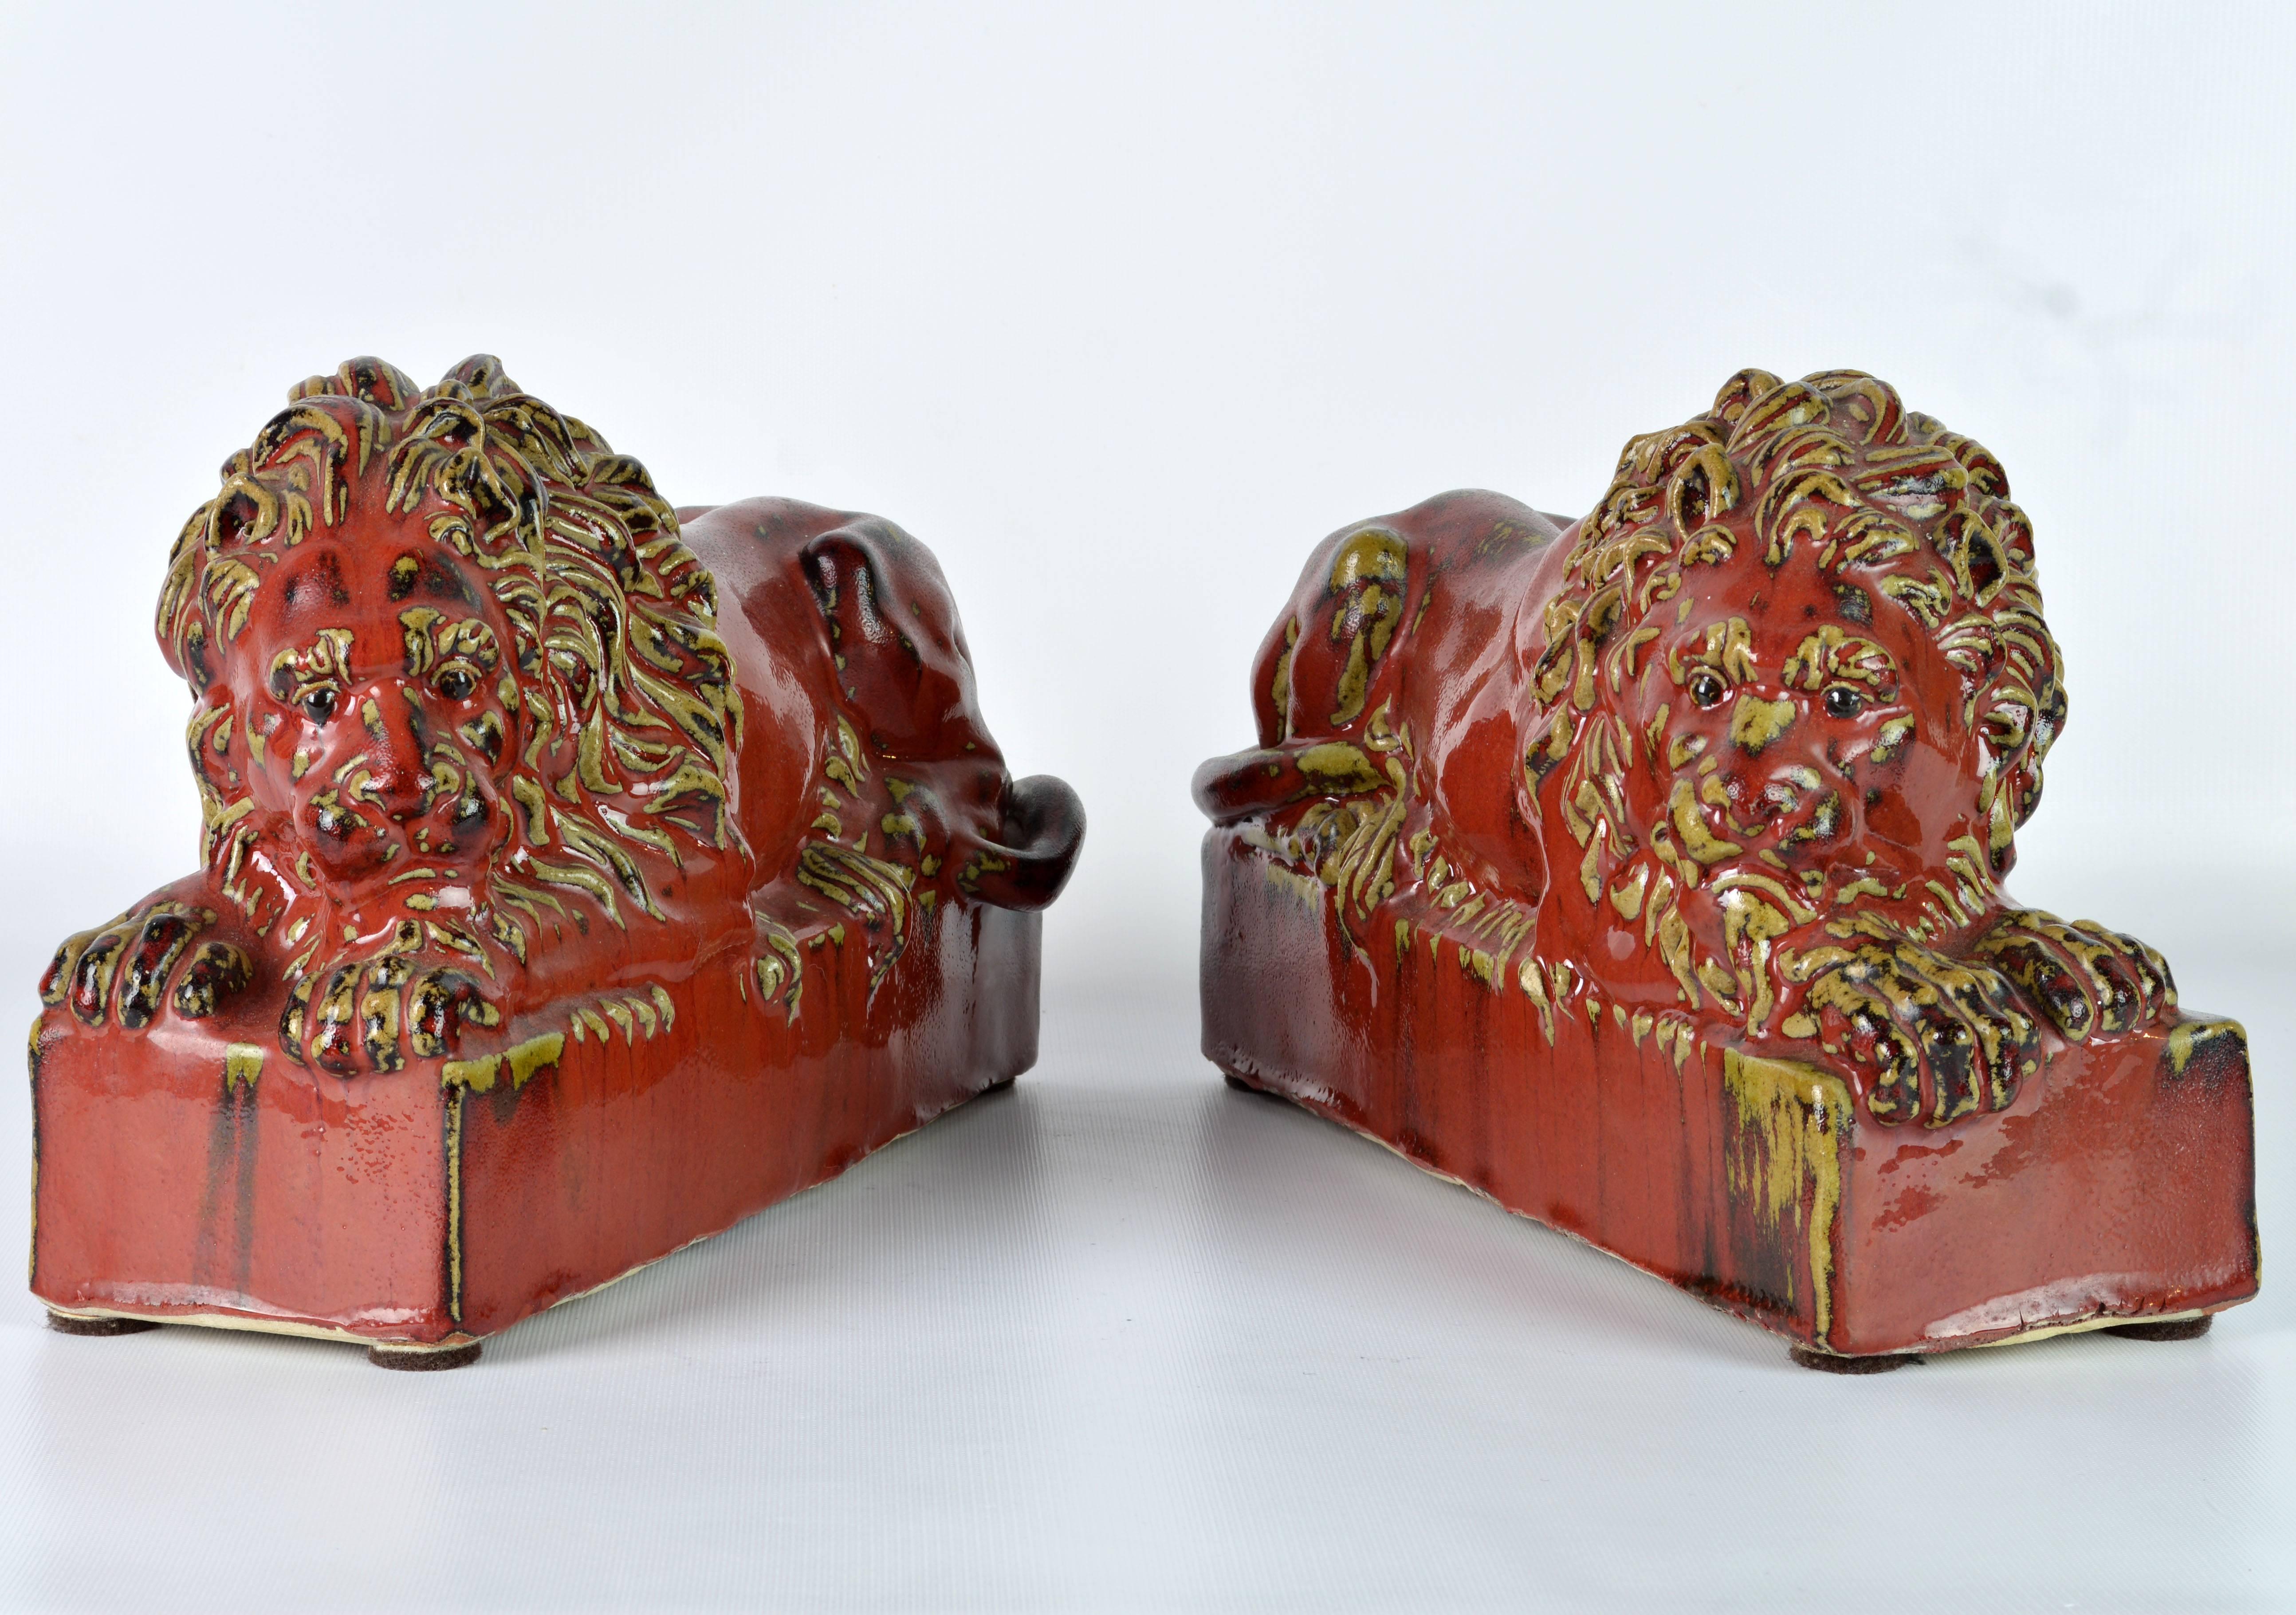 Opposing Pair of 20th Century Oxblood and Celadon Glazed Ceramic Resting Lions 1